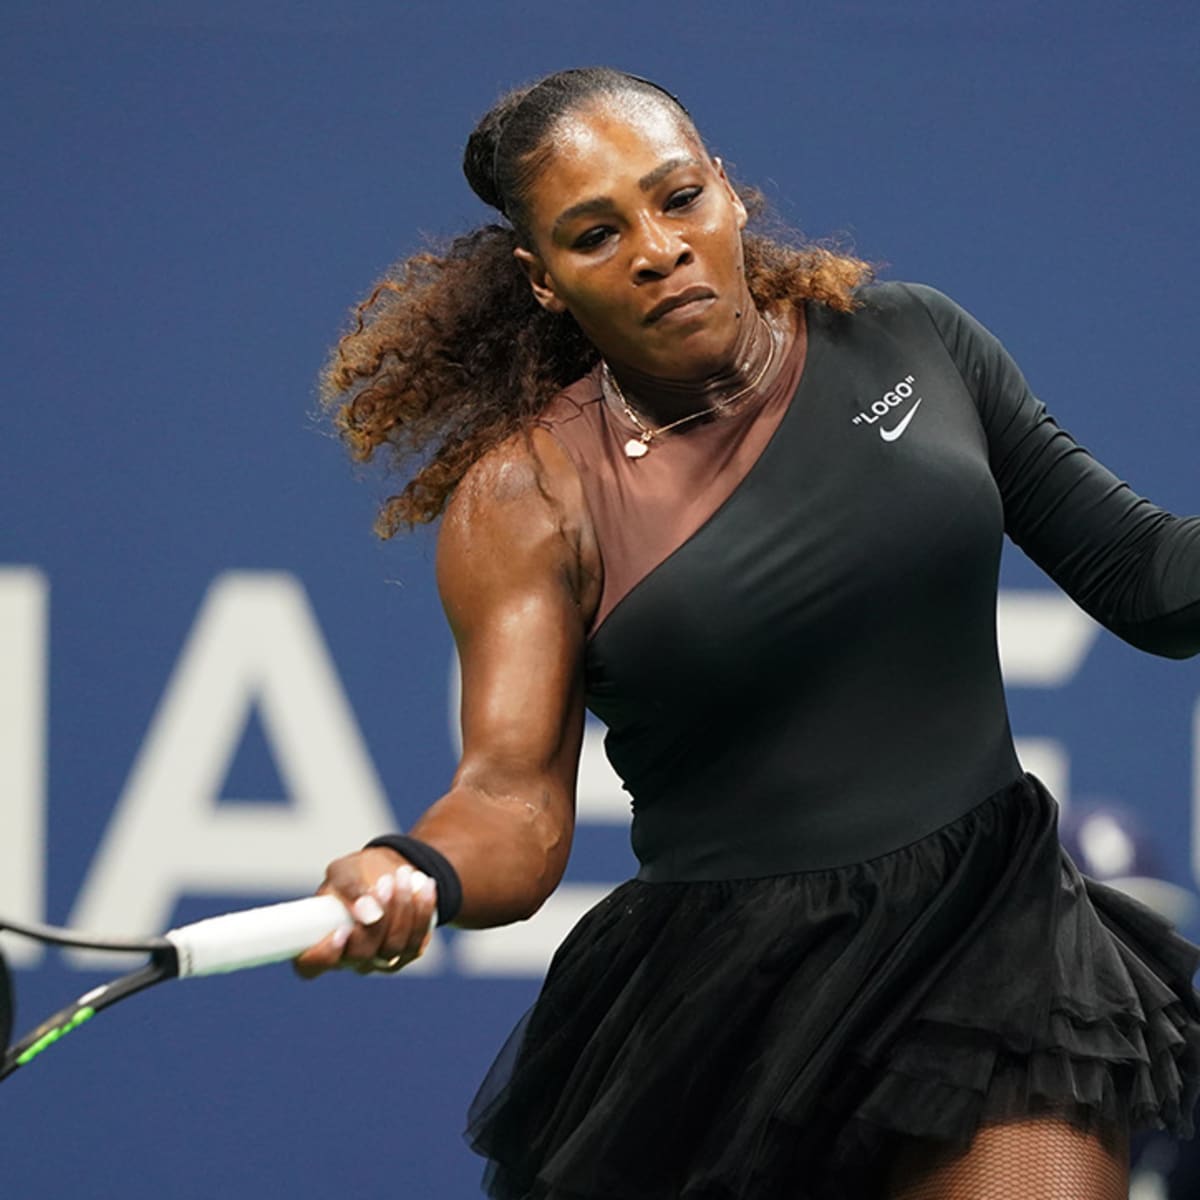 Serena Williams narrates new ad to air during Oscars (video) - Sports Illustrated